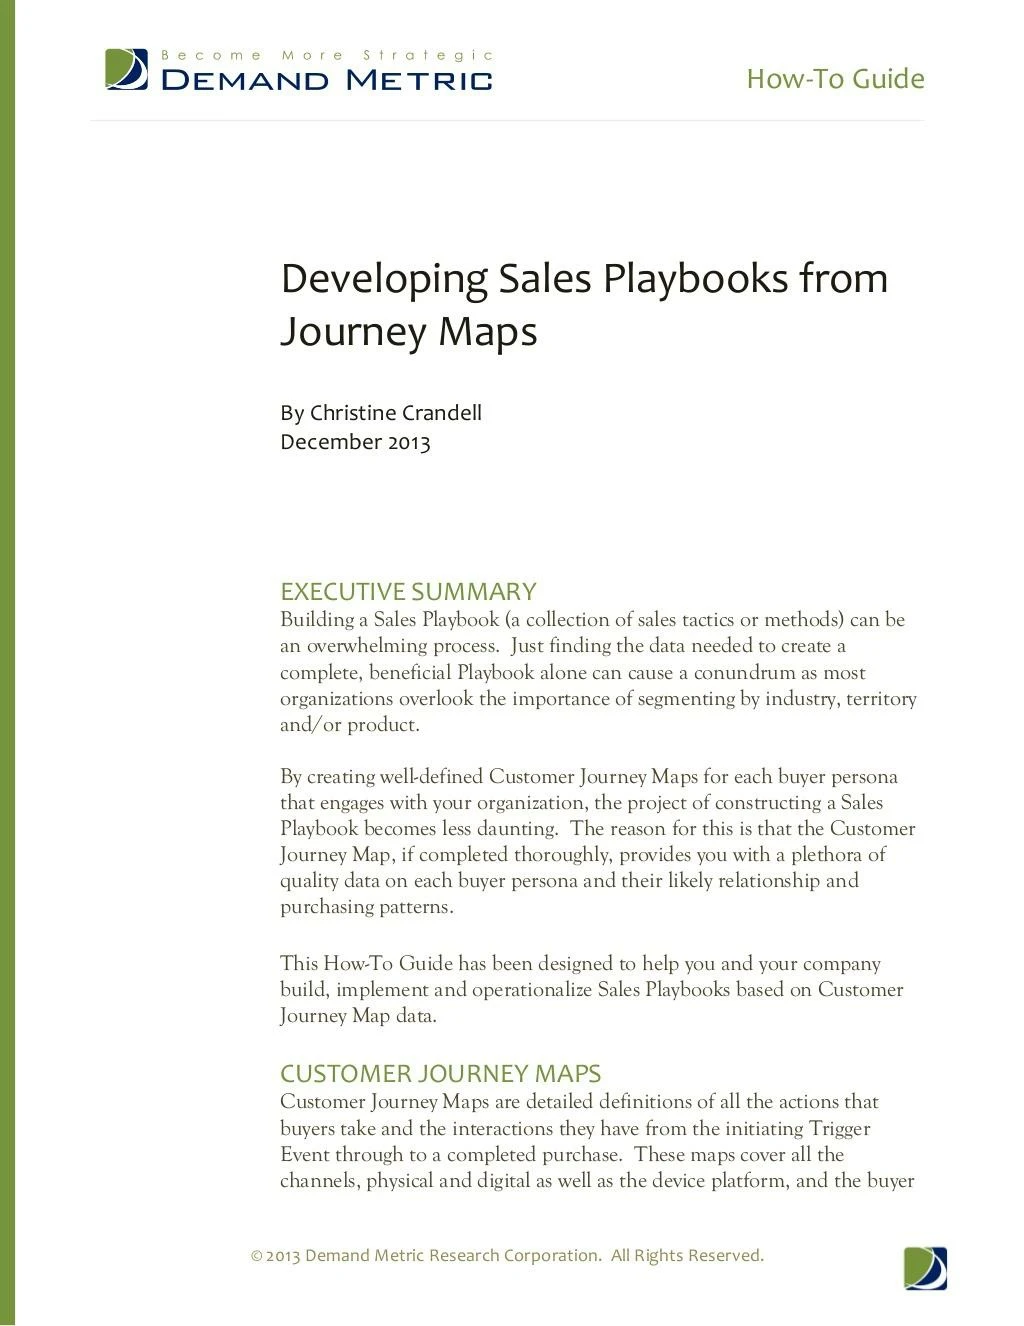 how to guide developing sales playbooks from journey maps